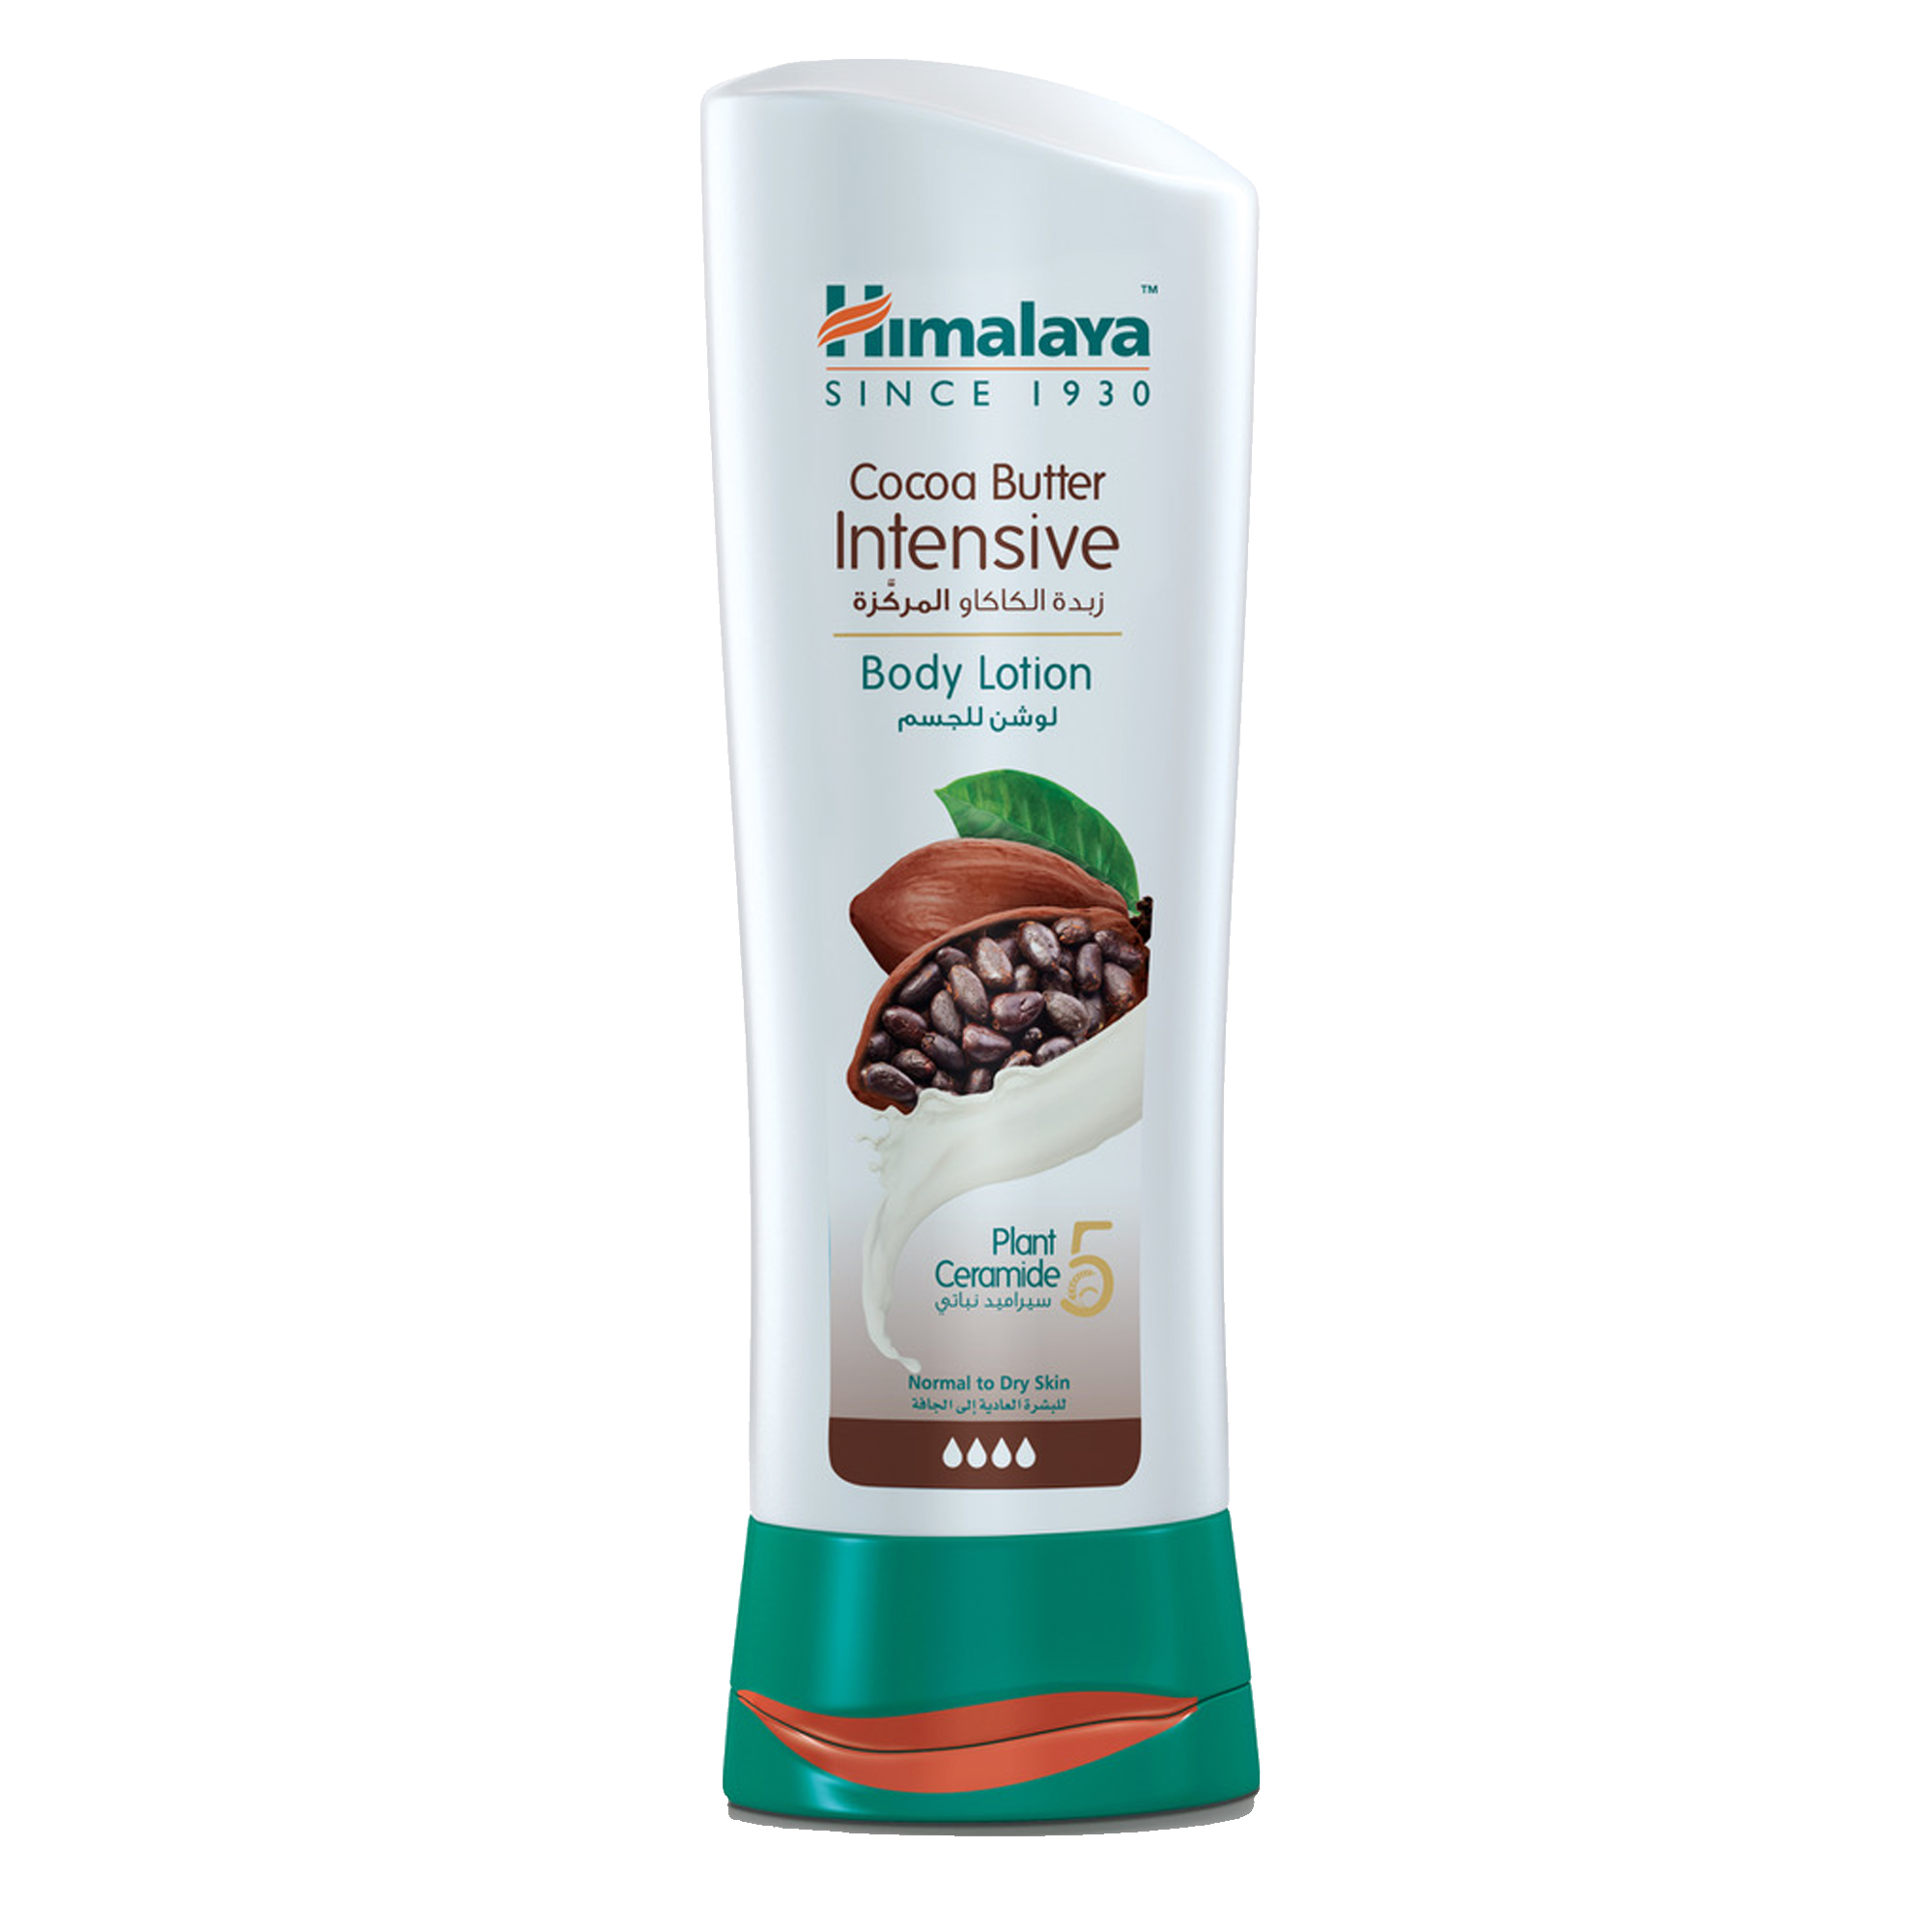 Himalaya Cocoa Butter Intensive Body Lotion 200ml - Nourishes Skin